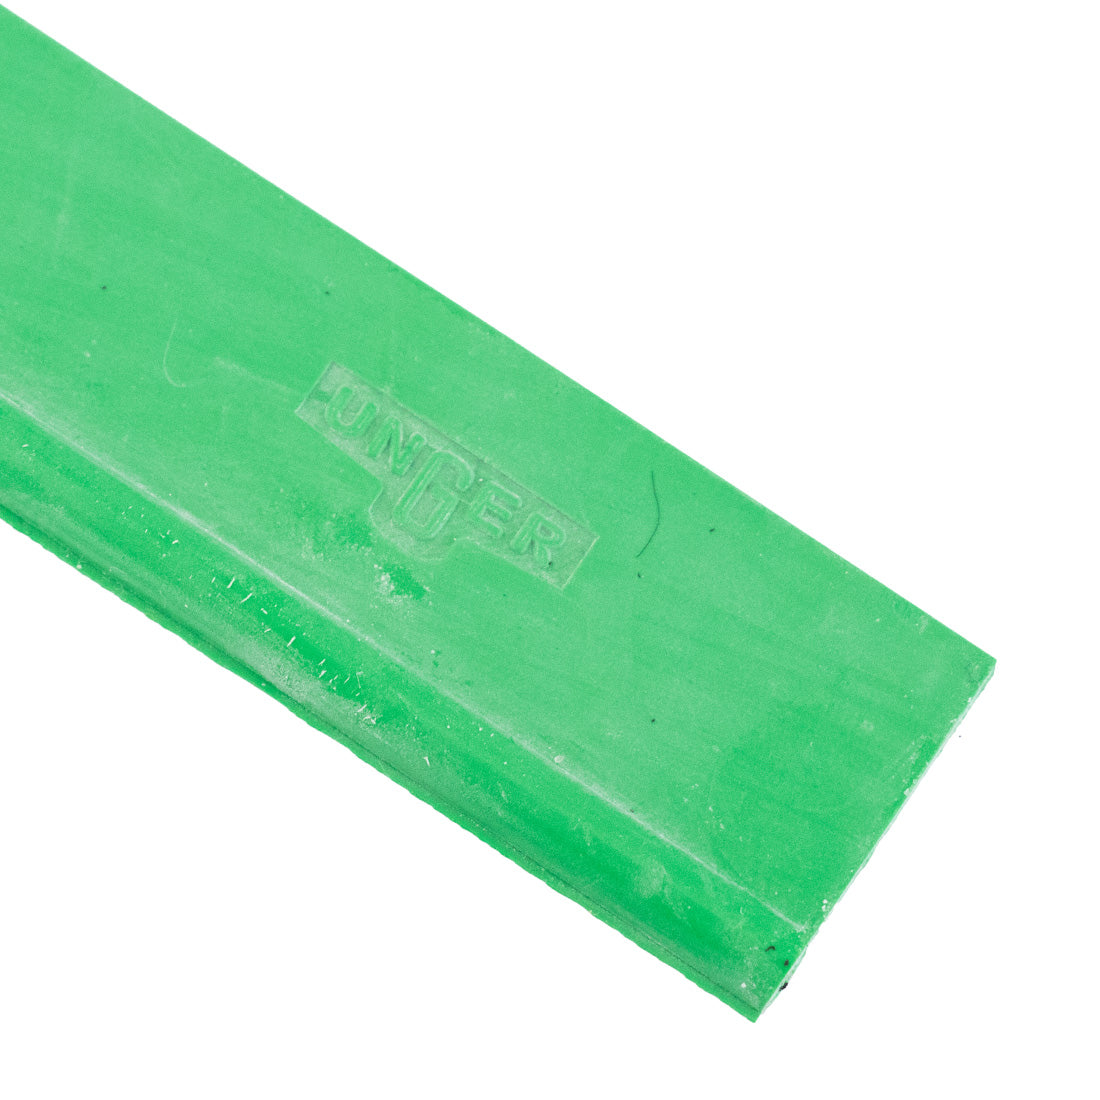 Unger Green Power Squeegee Rubber Detailed Logo Corner Section Close-Up View